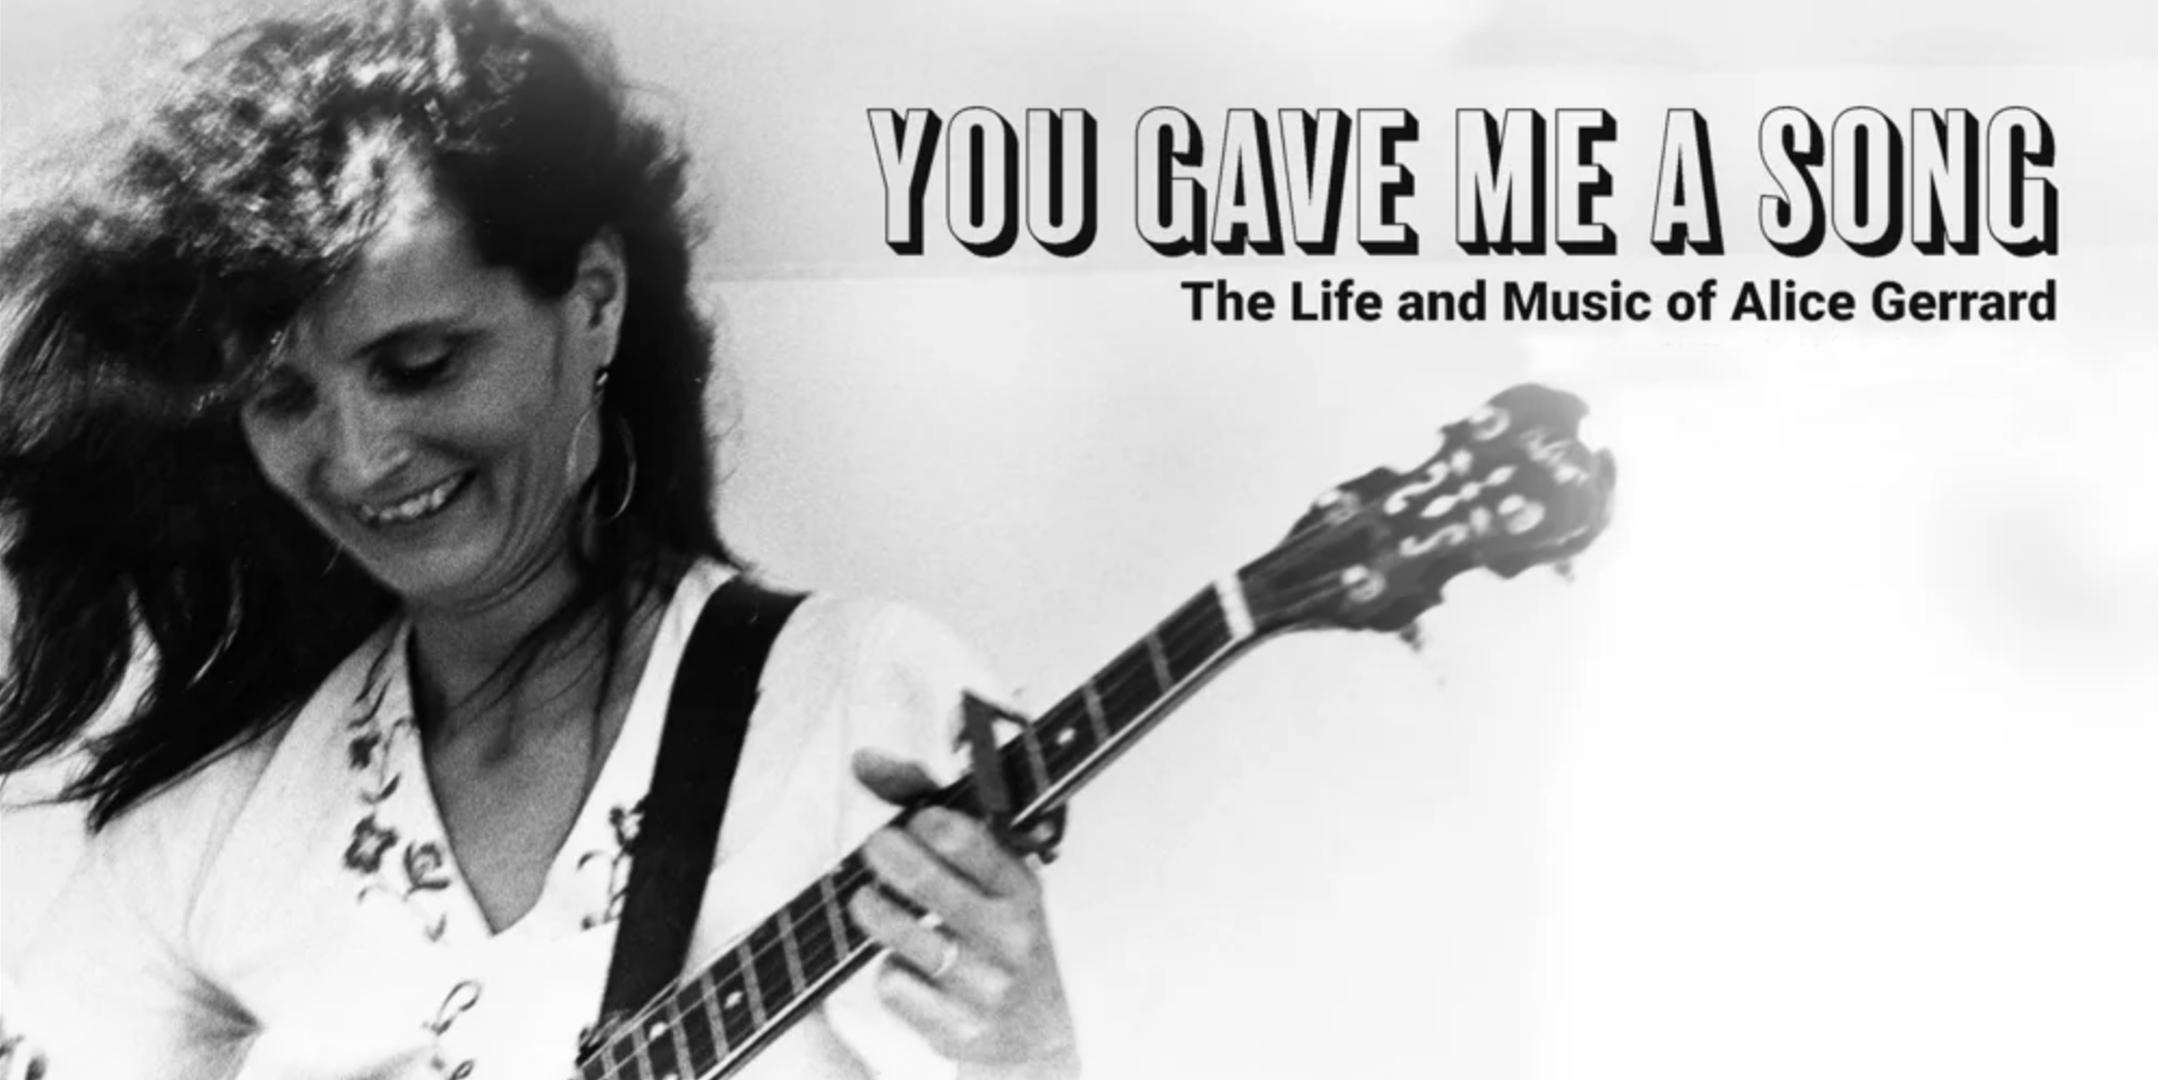 Films @ The Freight: You Gave Me A Song:The Life and Music of Alice Gerrard